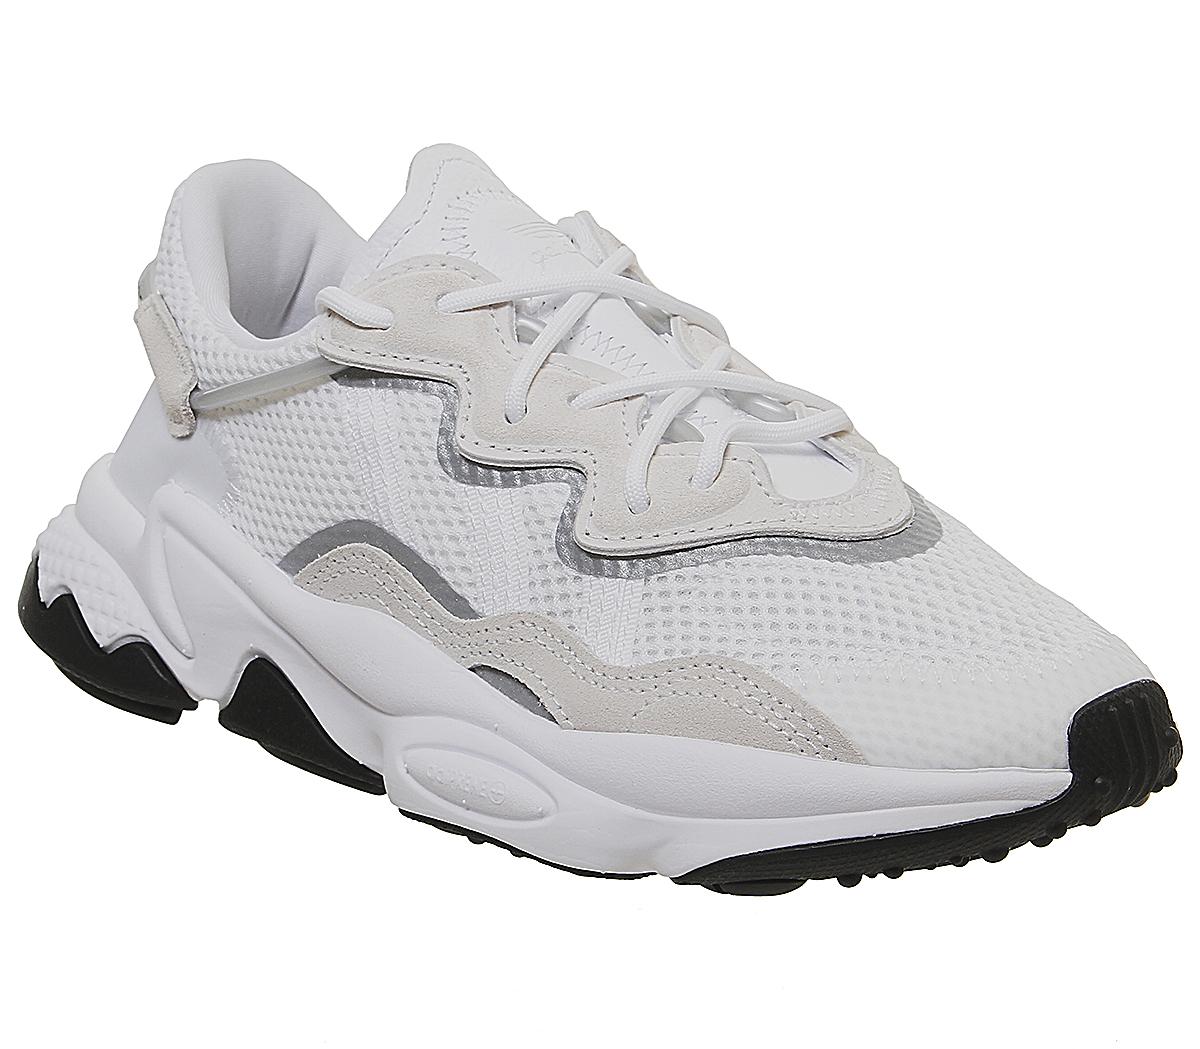 adidas Ozweego Jnr Trainers White White Core Black - Hers trainers